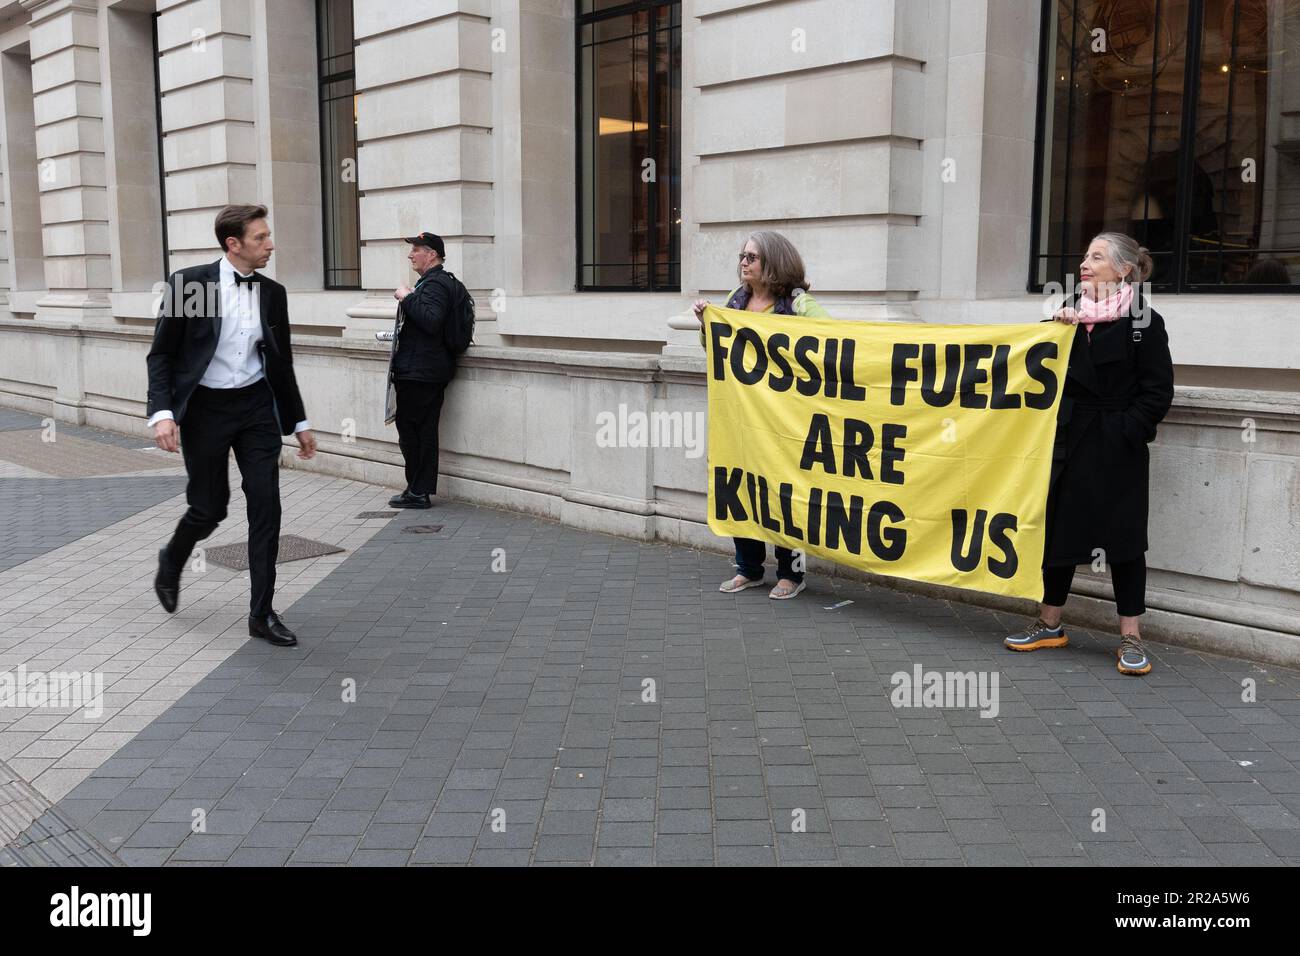 A guest of the Science Museum Director's Annual Dinner walks past climate activists protesting against fossil fuel sponsorship of the Museum. Stock Photo